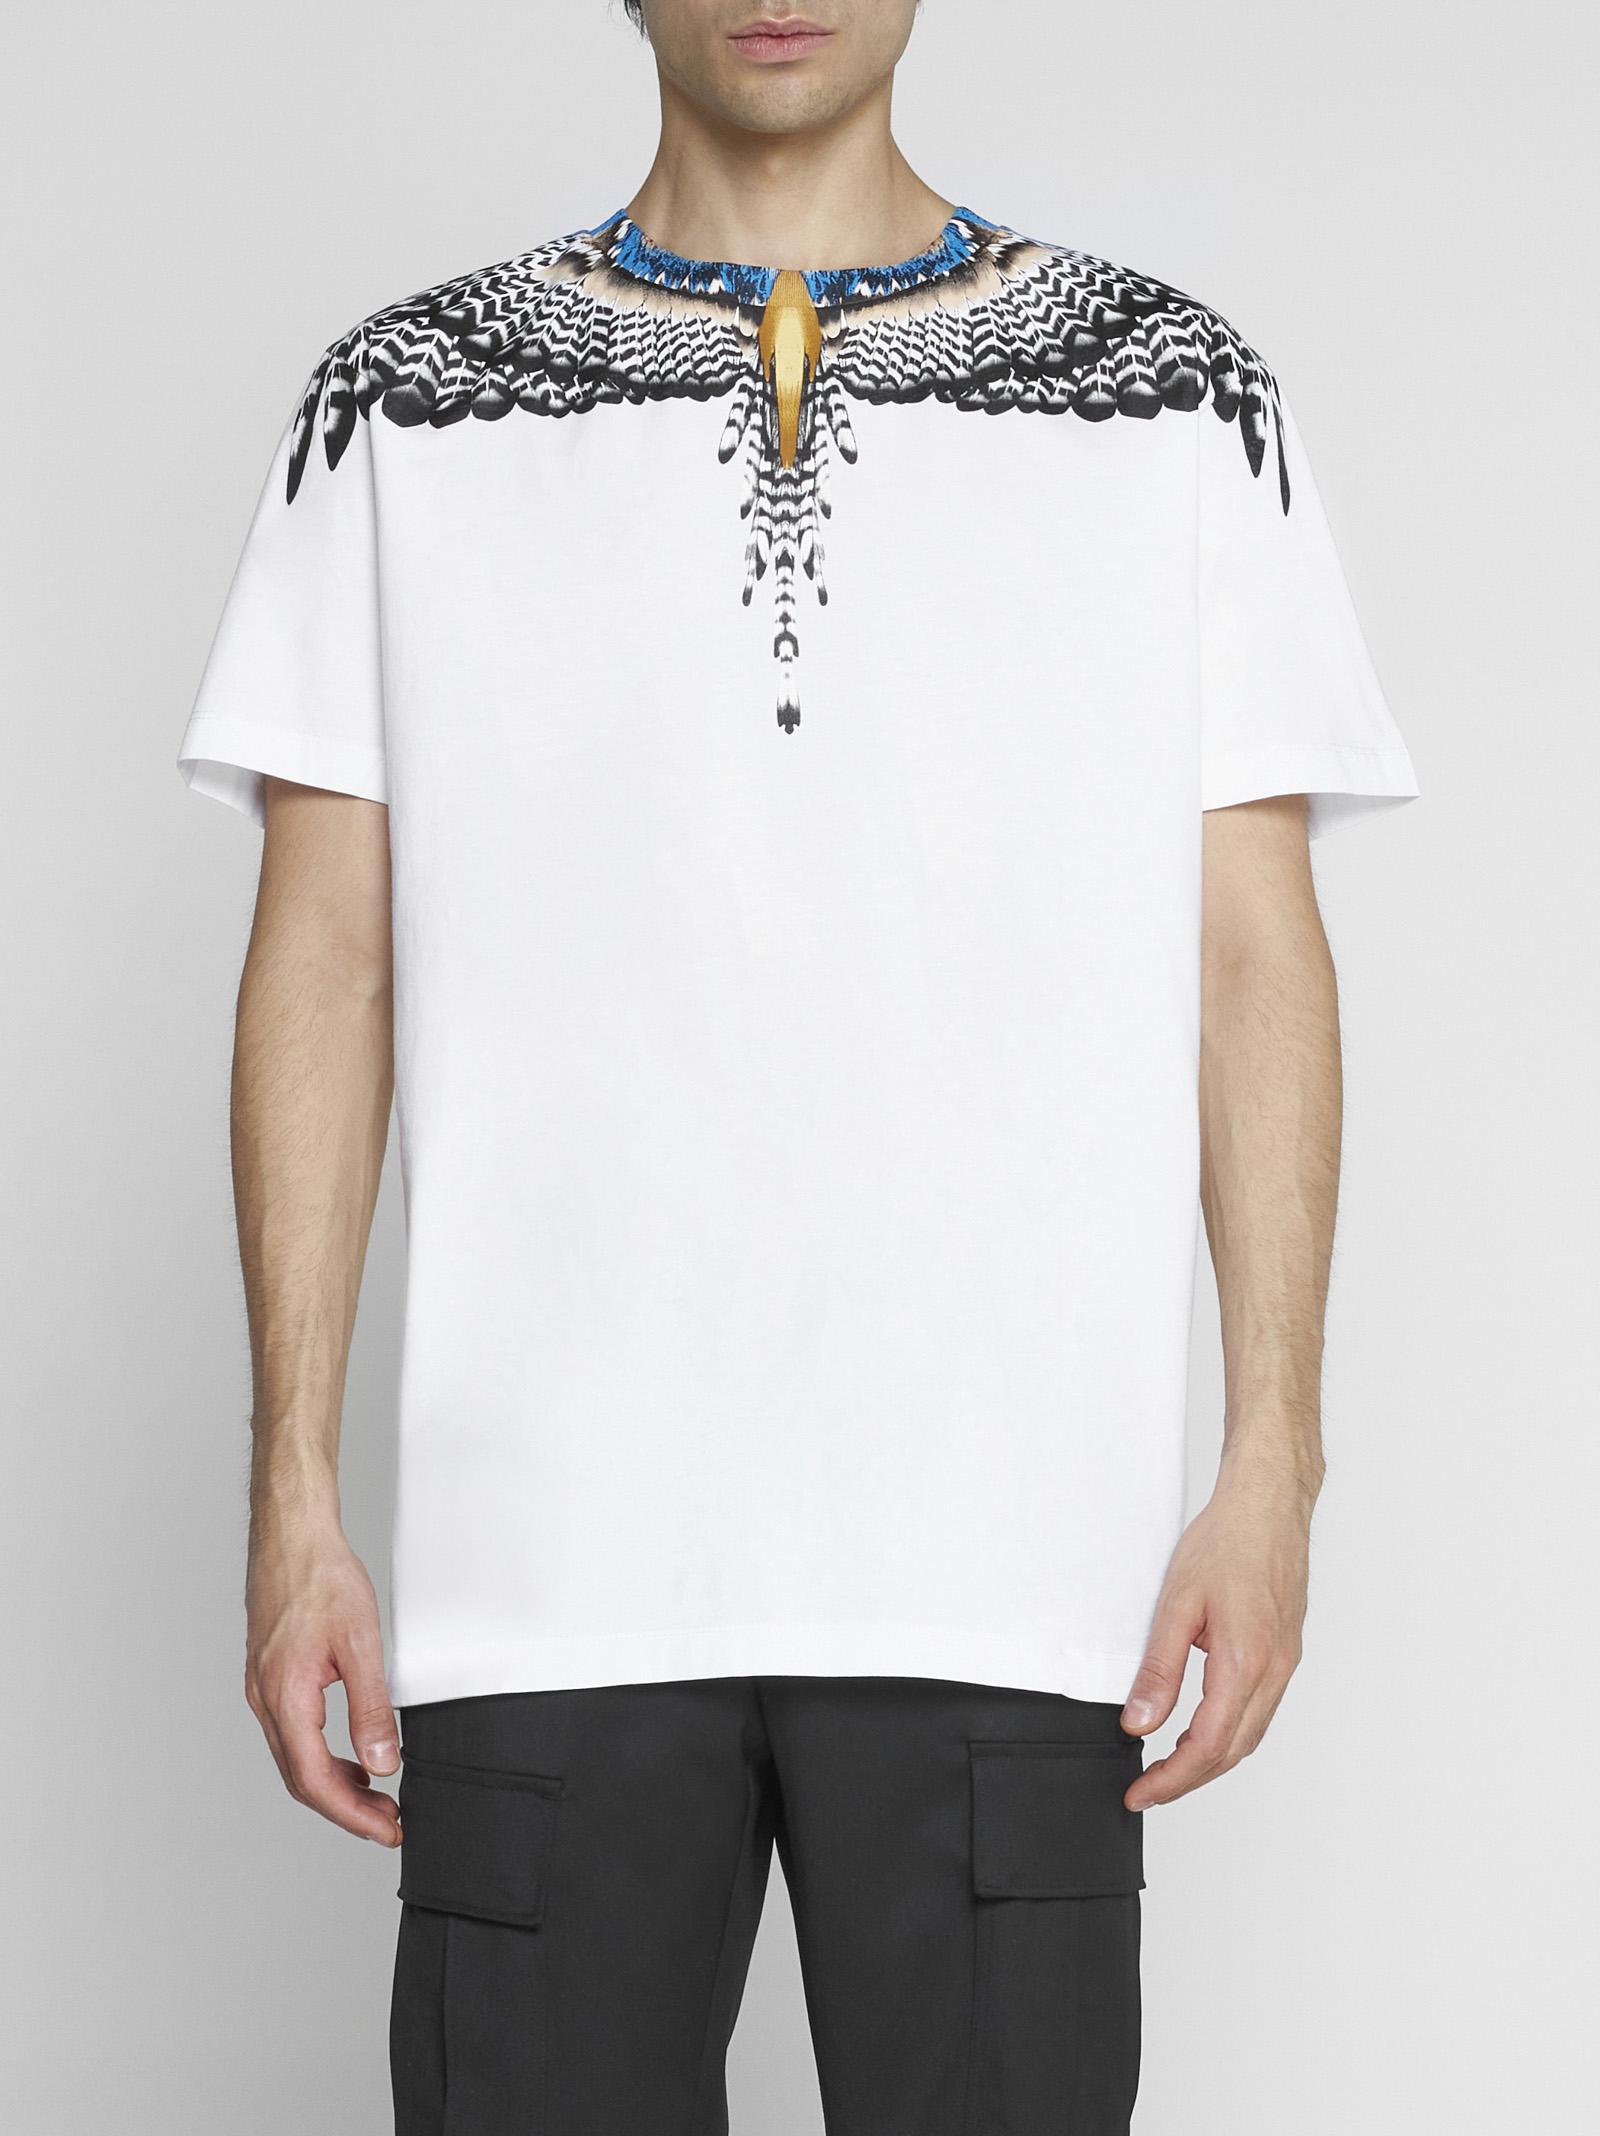 Marcelo Burlon Grizzly Wings Cotton T-shirt in White Dark Grey (White) for  Men - Save 11% | Lyst